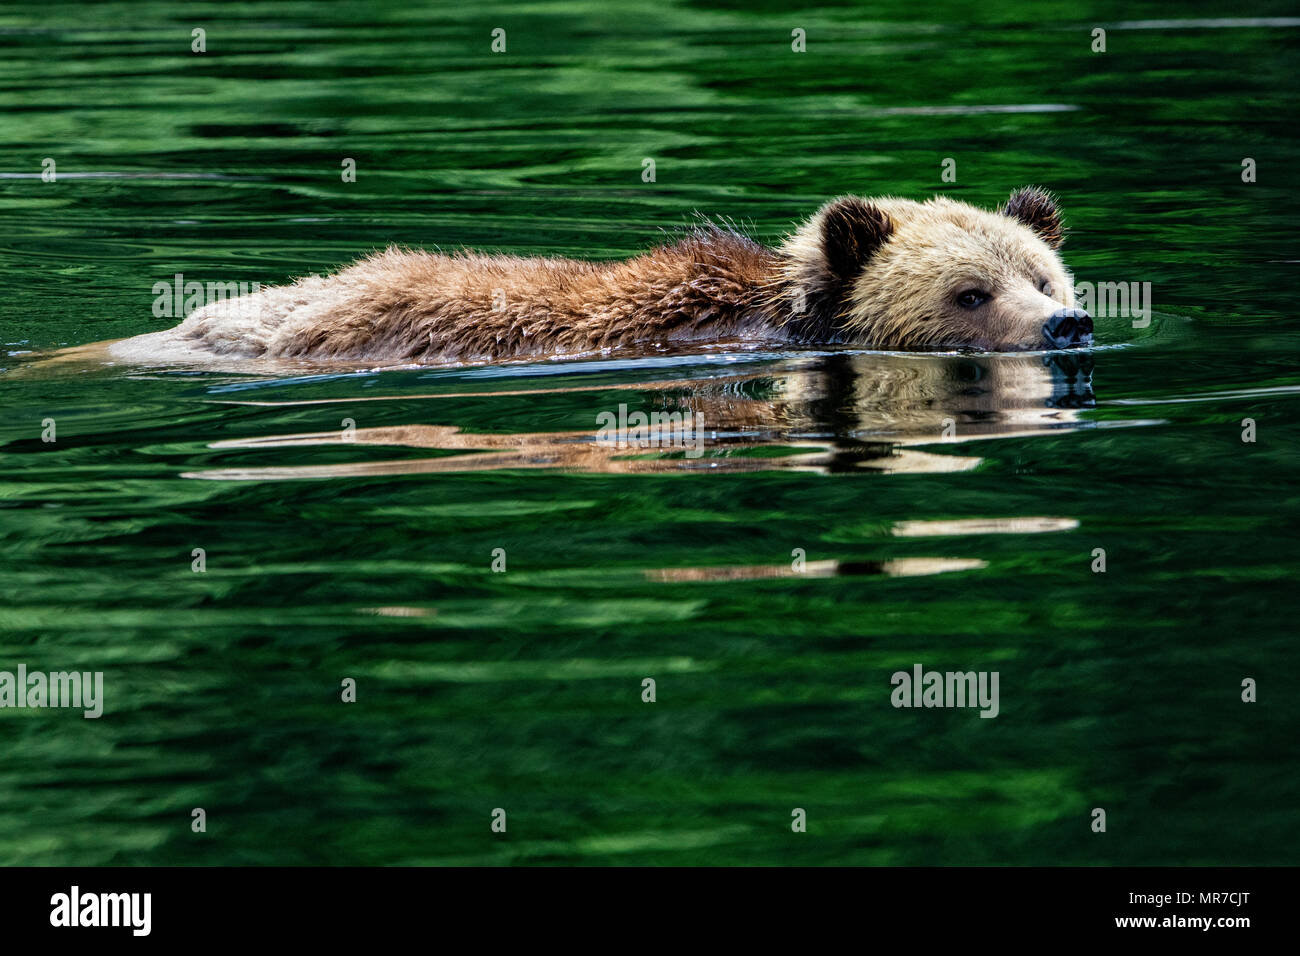 Grizzly bear swimming, Knight Inlet, First Nations Territory, British Columbia, Canada. Stock Photo